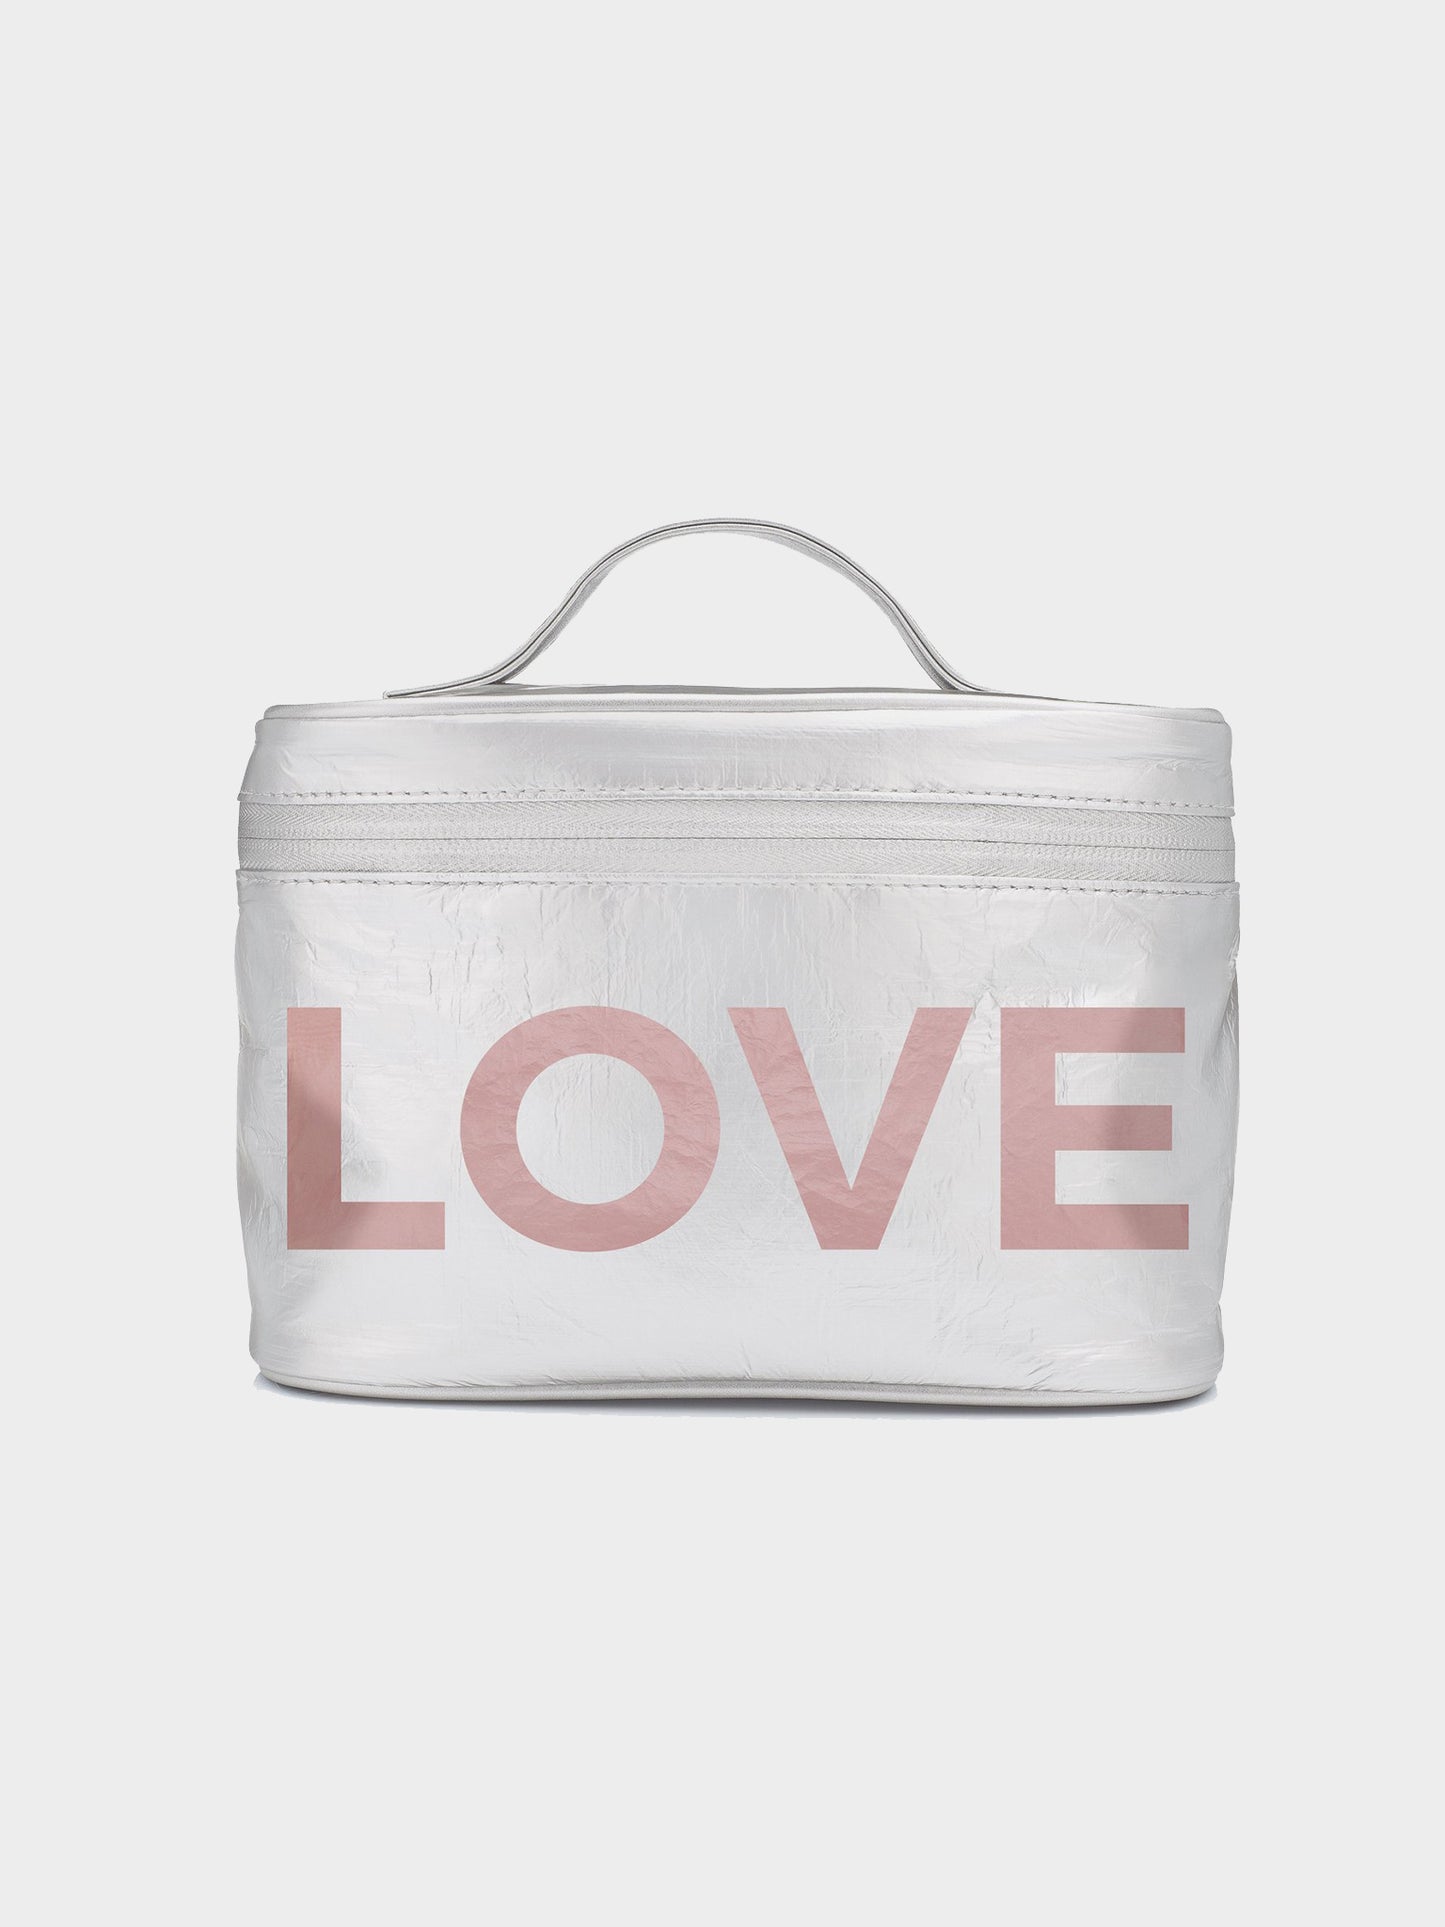 Hi Love Travel Travel Pack - Metallic Silver with Shimmering Pink Sand